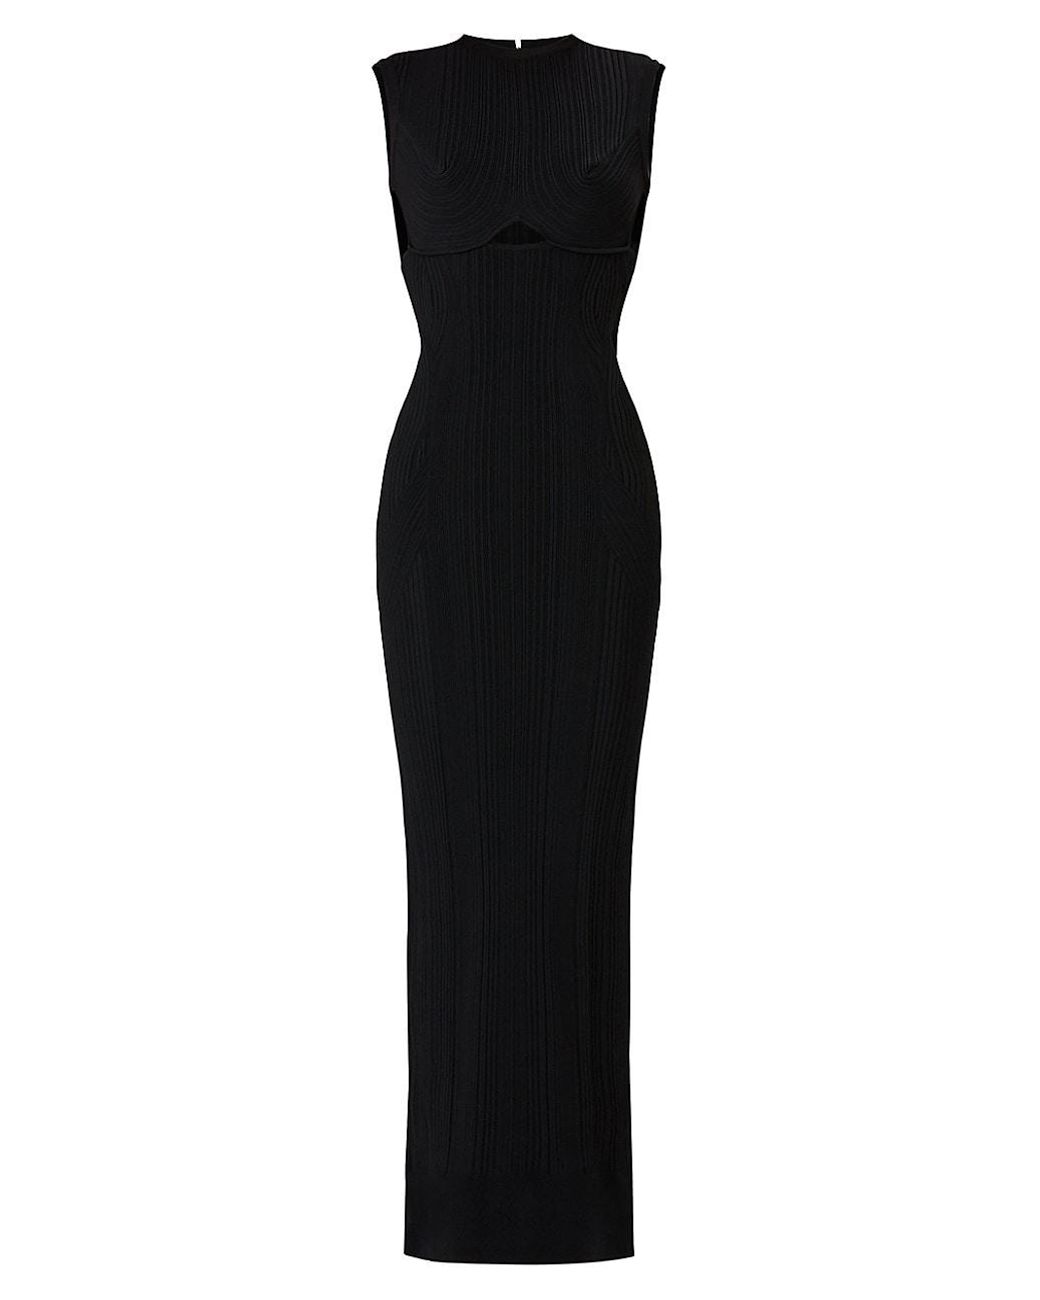 Hervé Léger Synthetic Variegated Rib Bodycon Gown in Black | Lyst